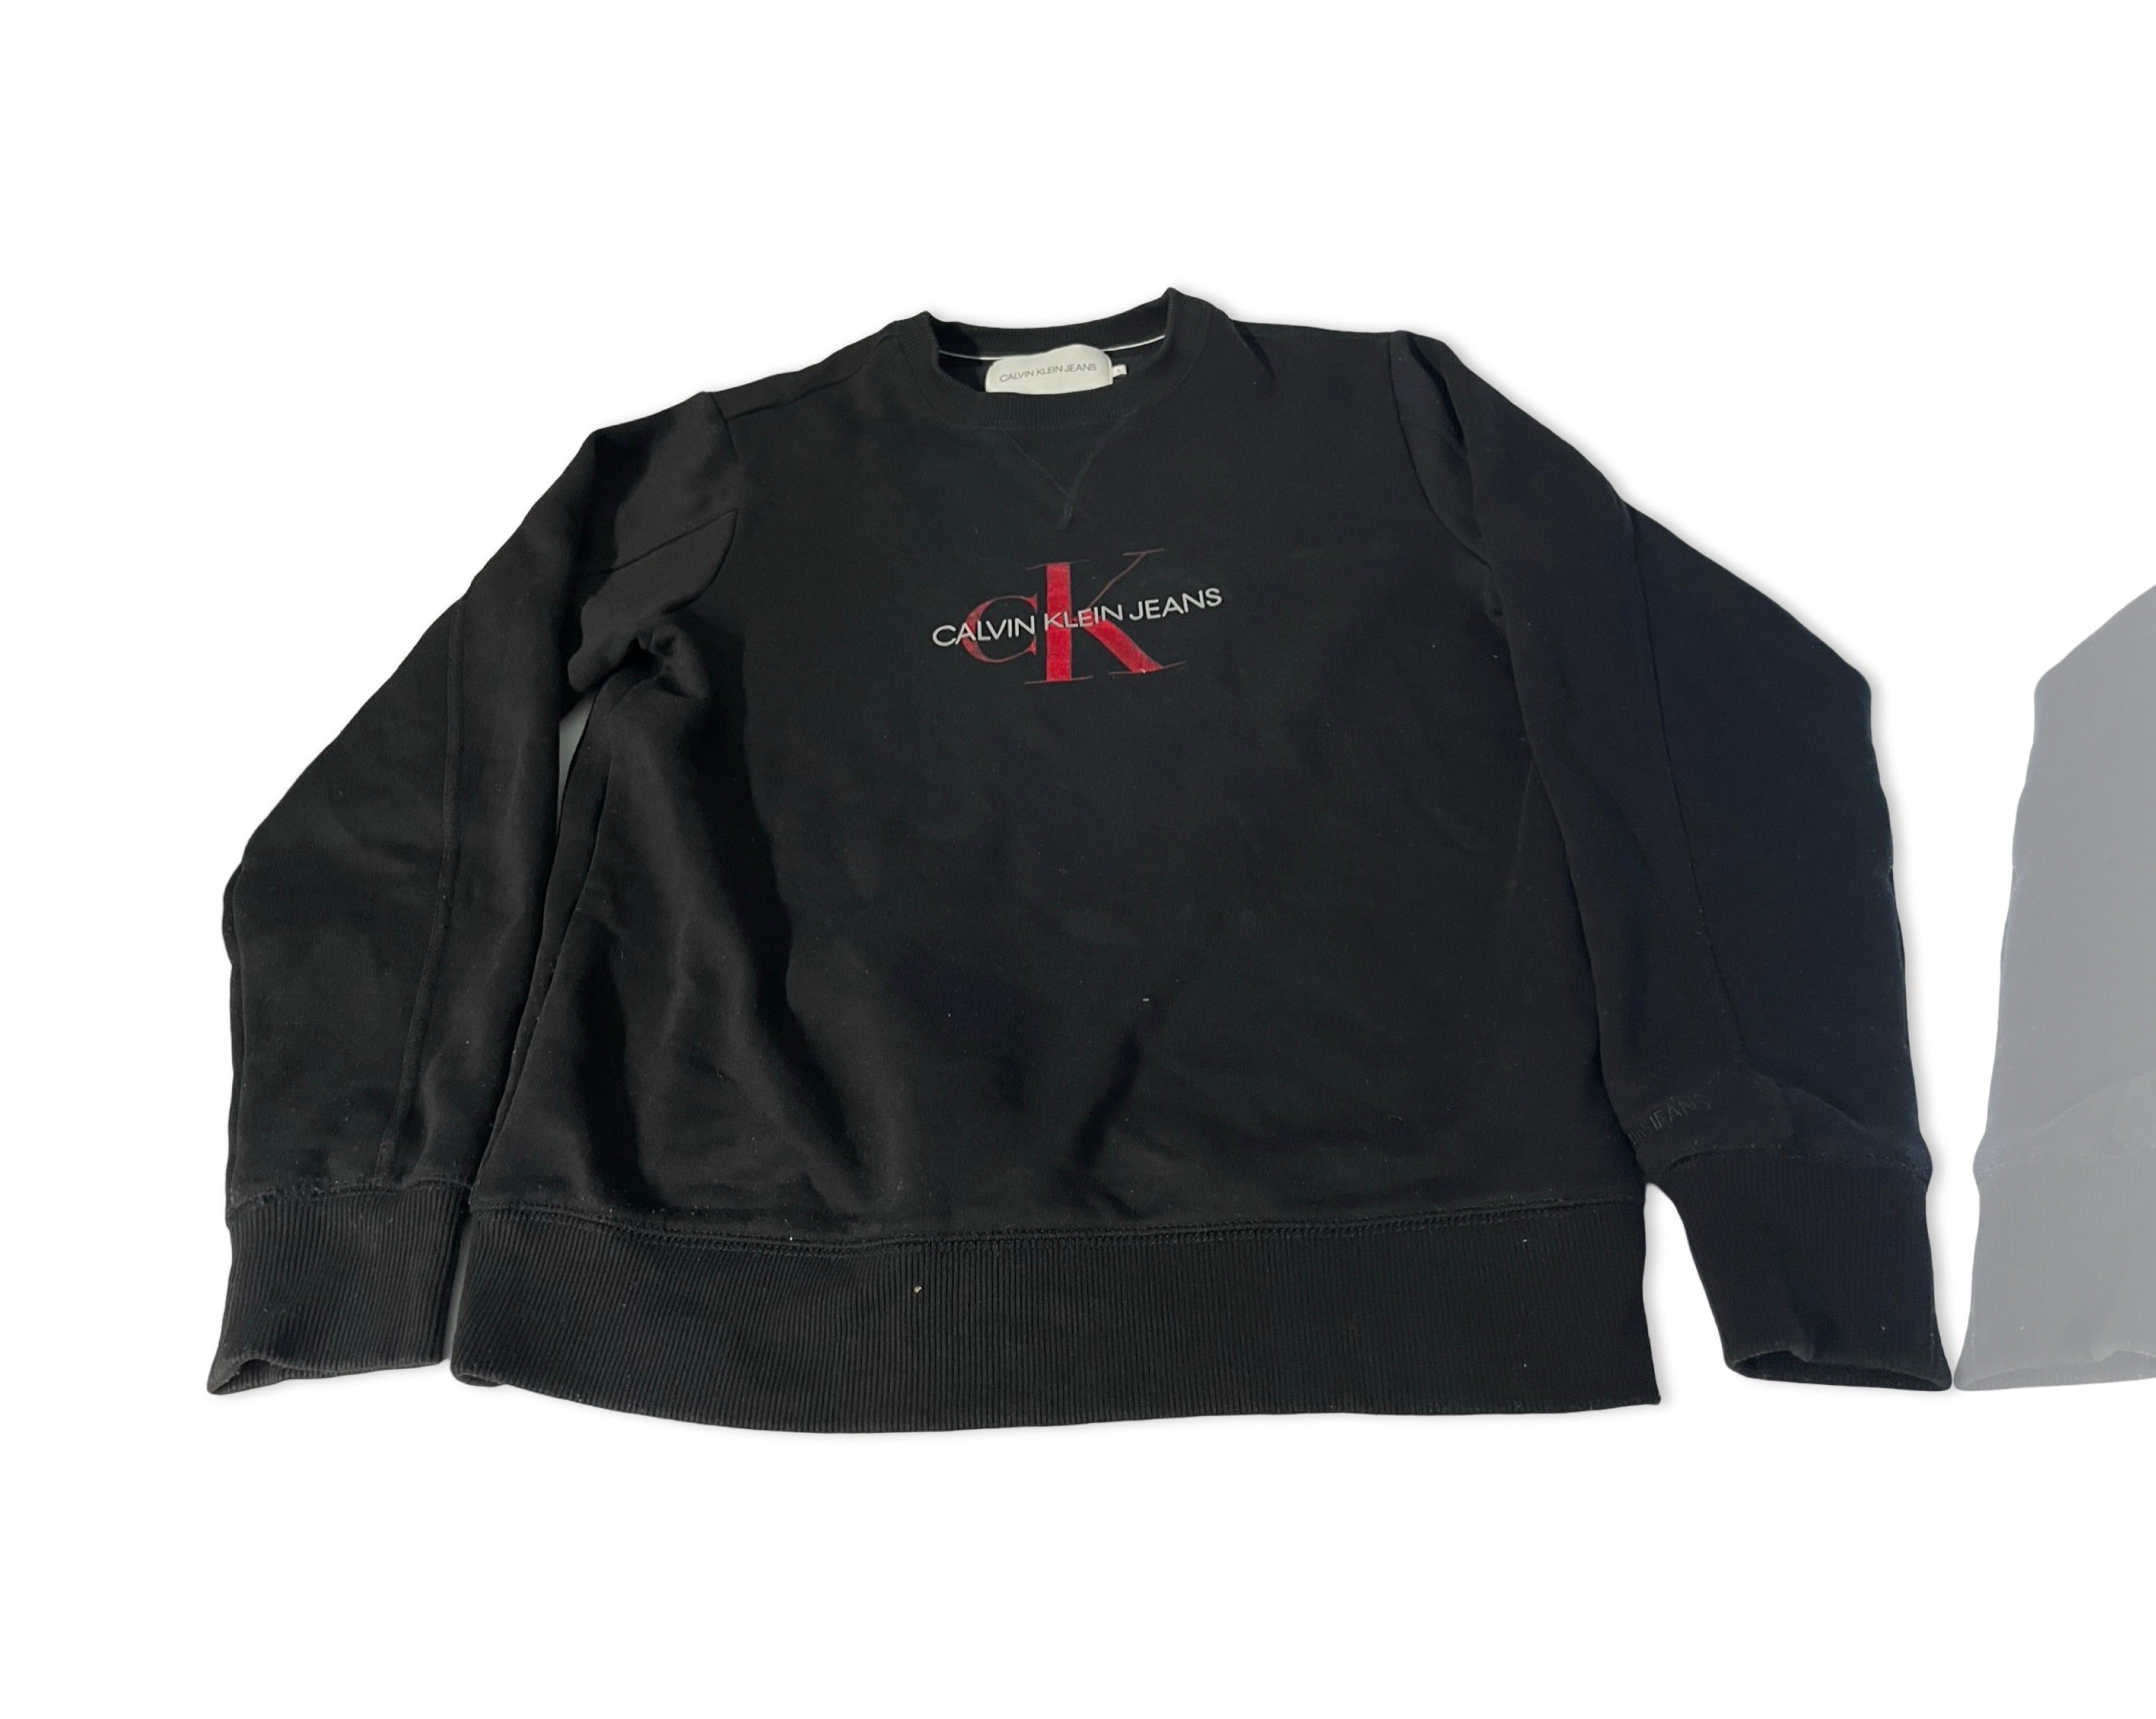 Vintage men's CALVIN KLEIN Jeans center logo black sweatshirt Size S oversize faded pullover|SKU 4243  Keywords:#VintageCALVINKLEIN #Sweatshirt #Oversized #MensFashion #IconicLogo Key Features  It comes in a "BLACK" color with mixed material  Size : S  MEAUREMENT: S / Collar to bottom 26'' / Pit to pit 21’’  SKU: 4243